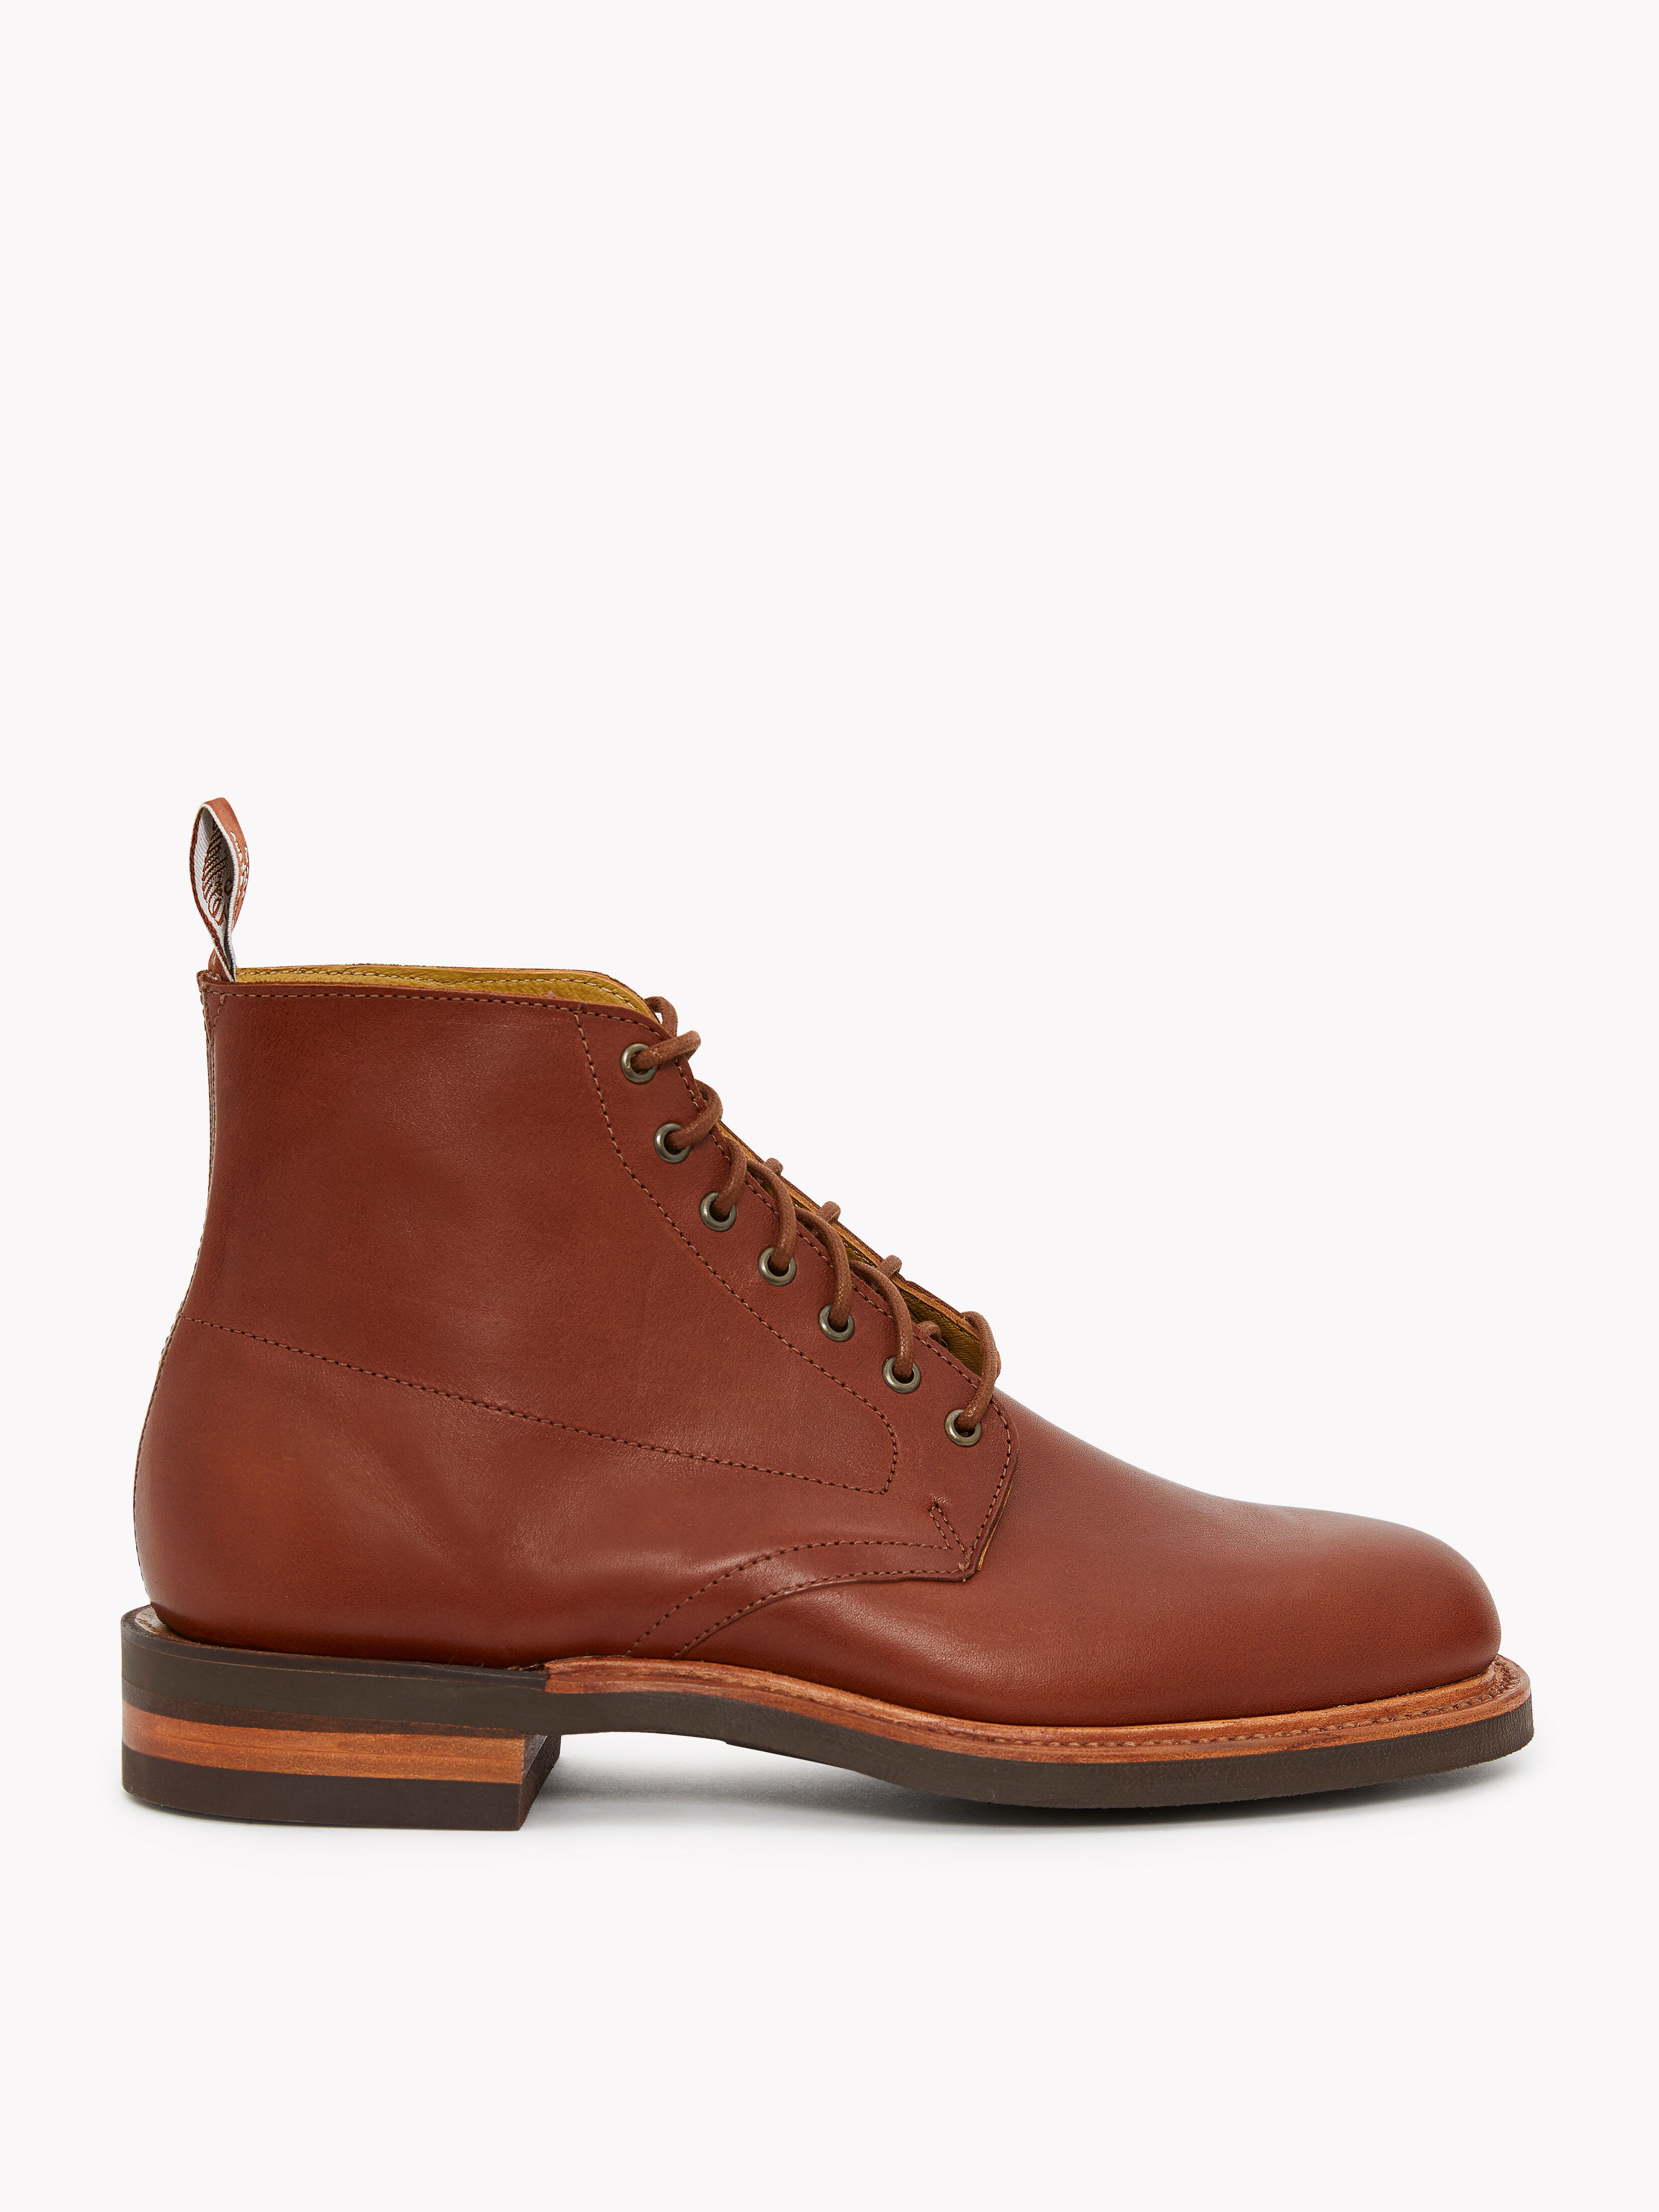 rm williams rigger boots